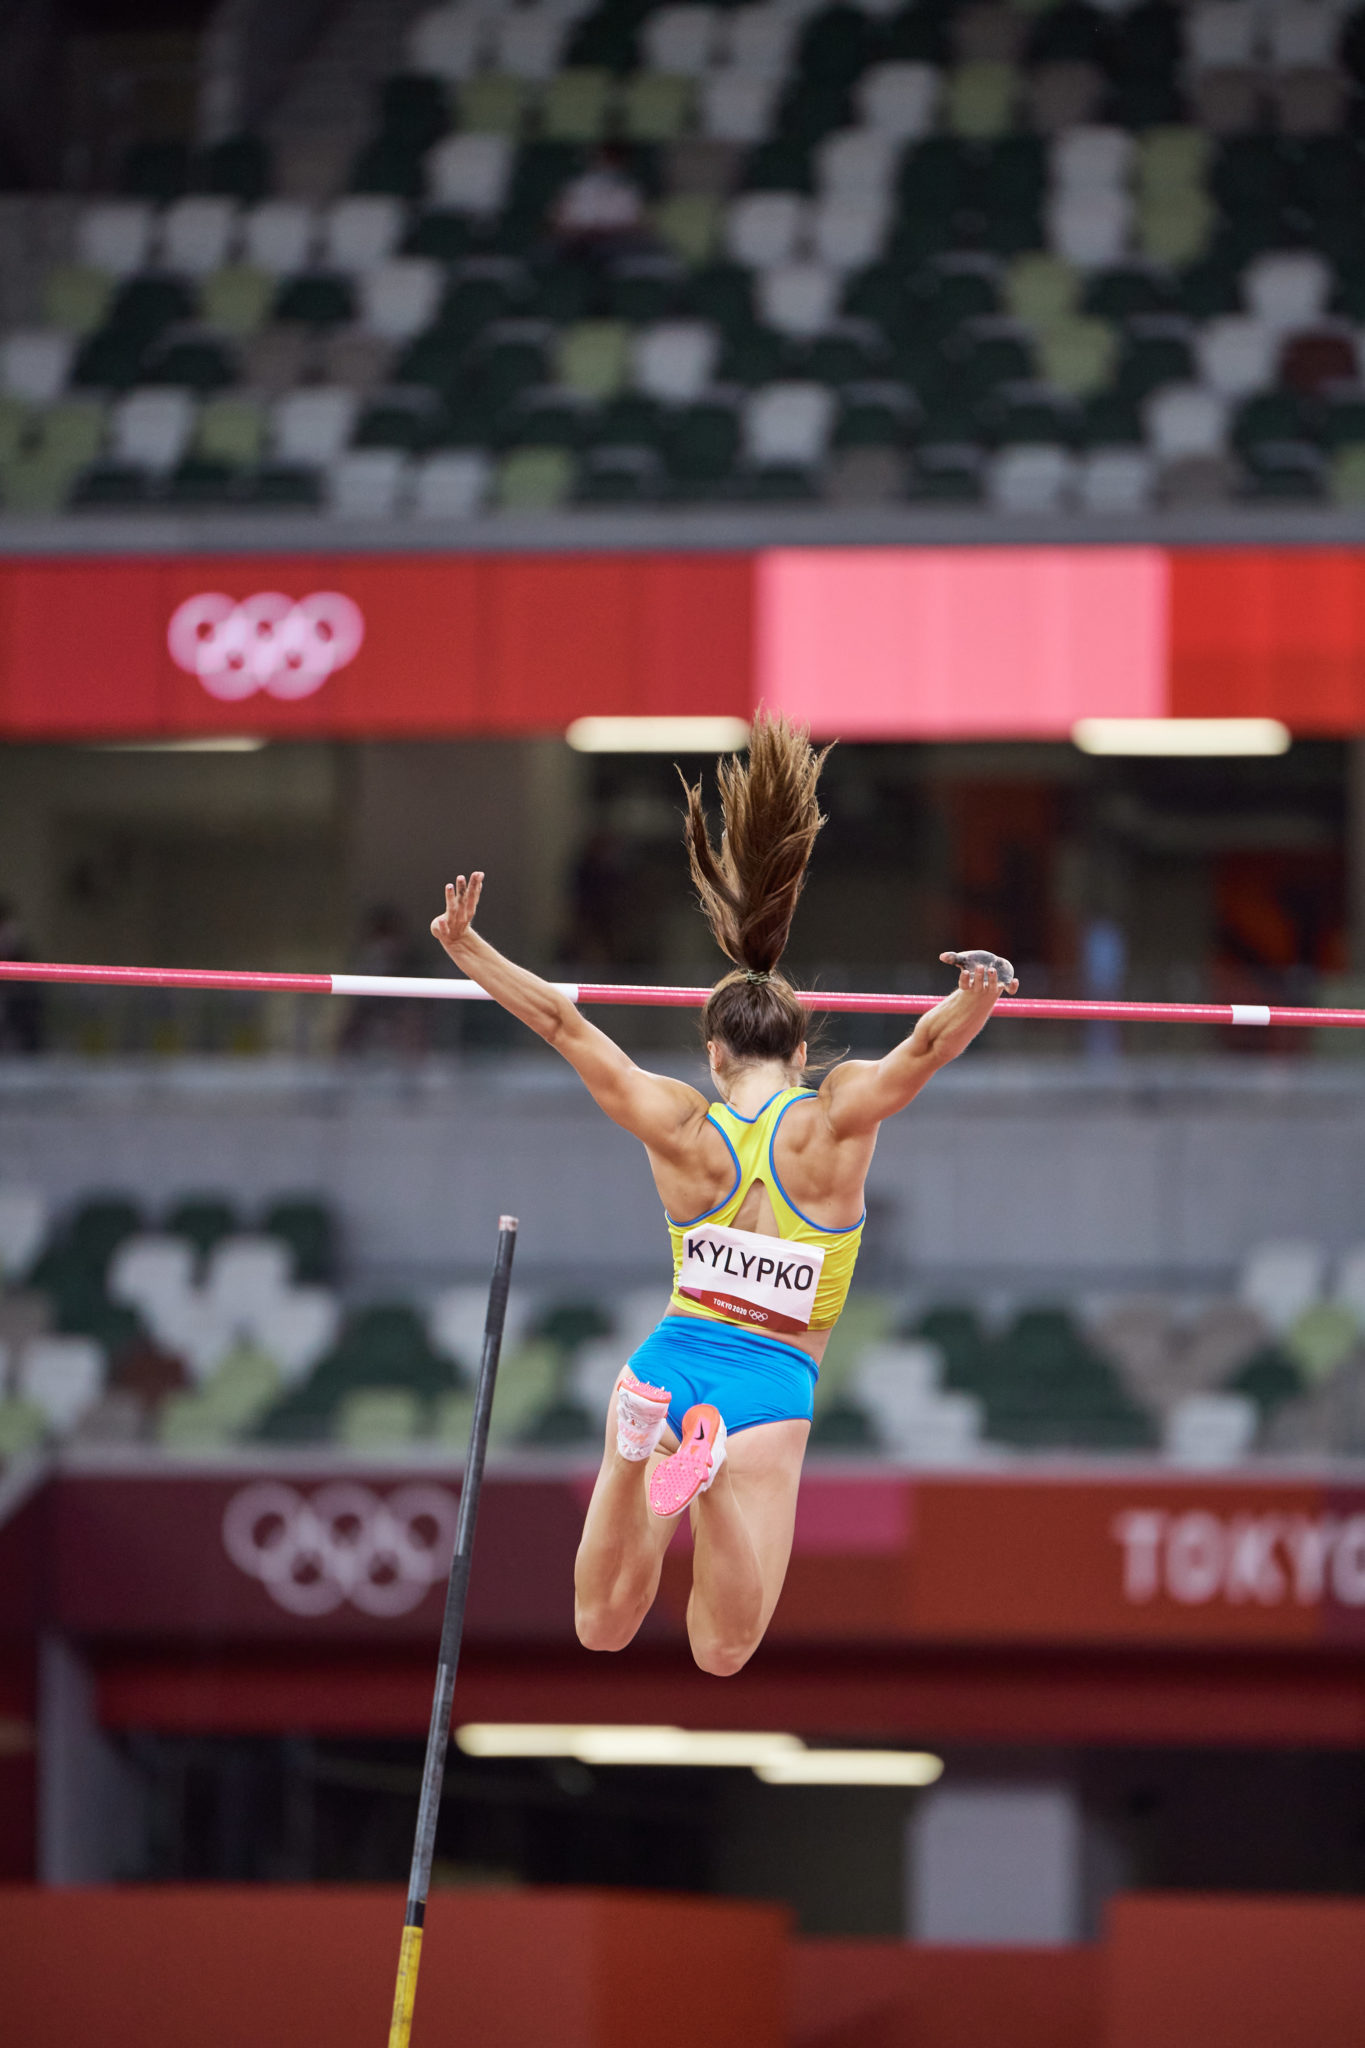 Phot of Ukraine's Maryna Kylypko in the women's pole vault qualifications during the Tokyo 2020 Olympics at the Olympic Stadium in Tokyo, Japan.